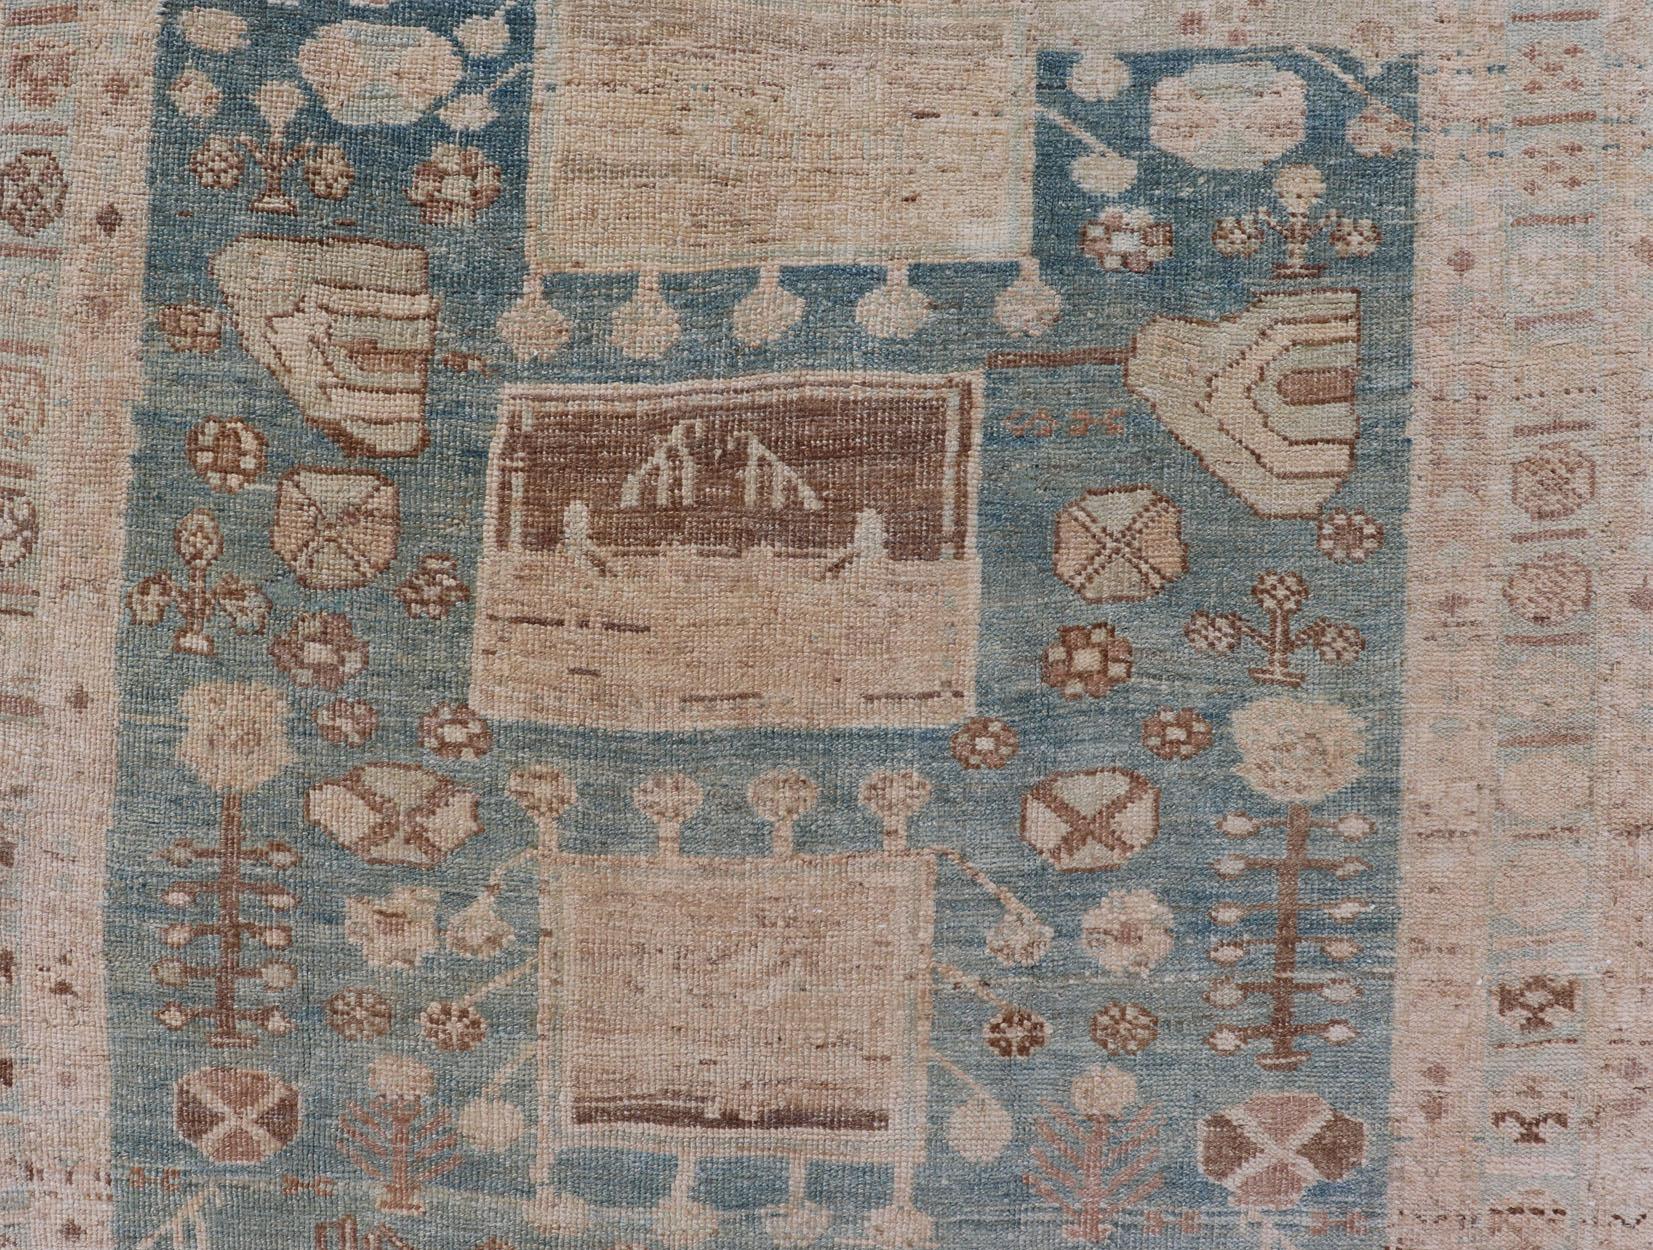 Persian Kurdish Antique Rug with Tribal Design in Light Blue, Teal, and Cream For Sale 2